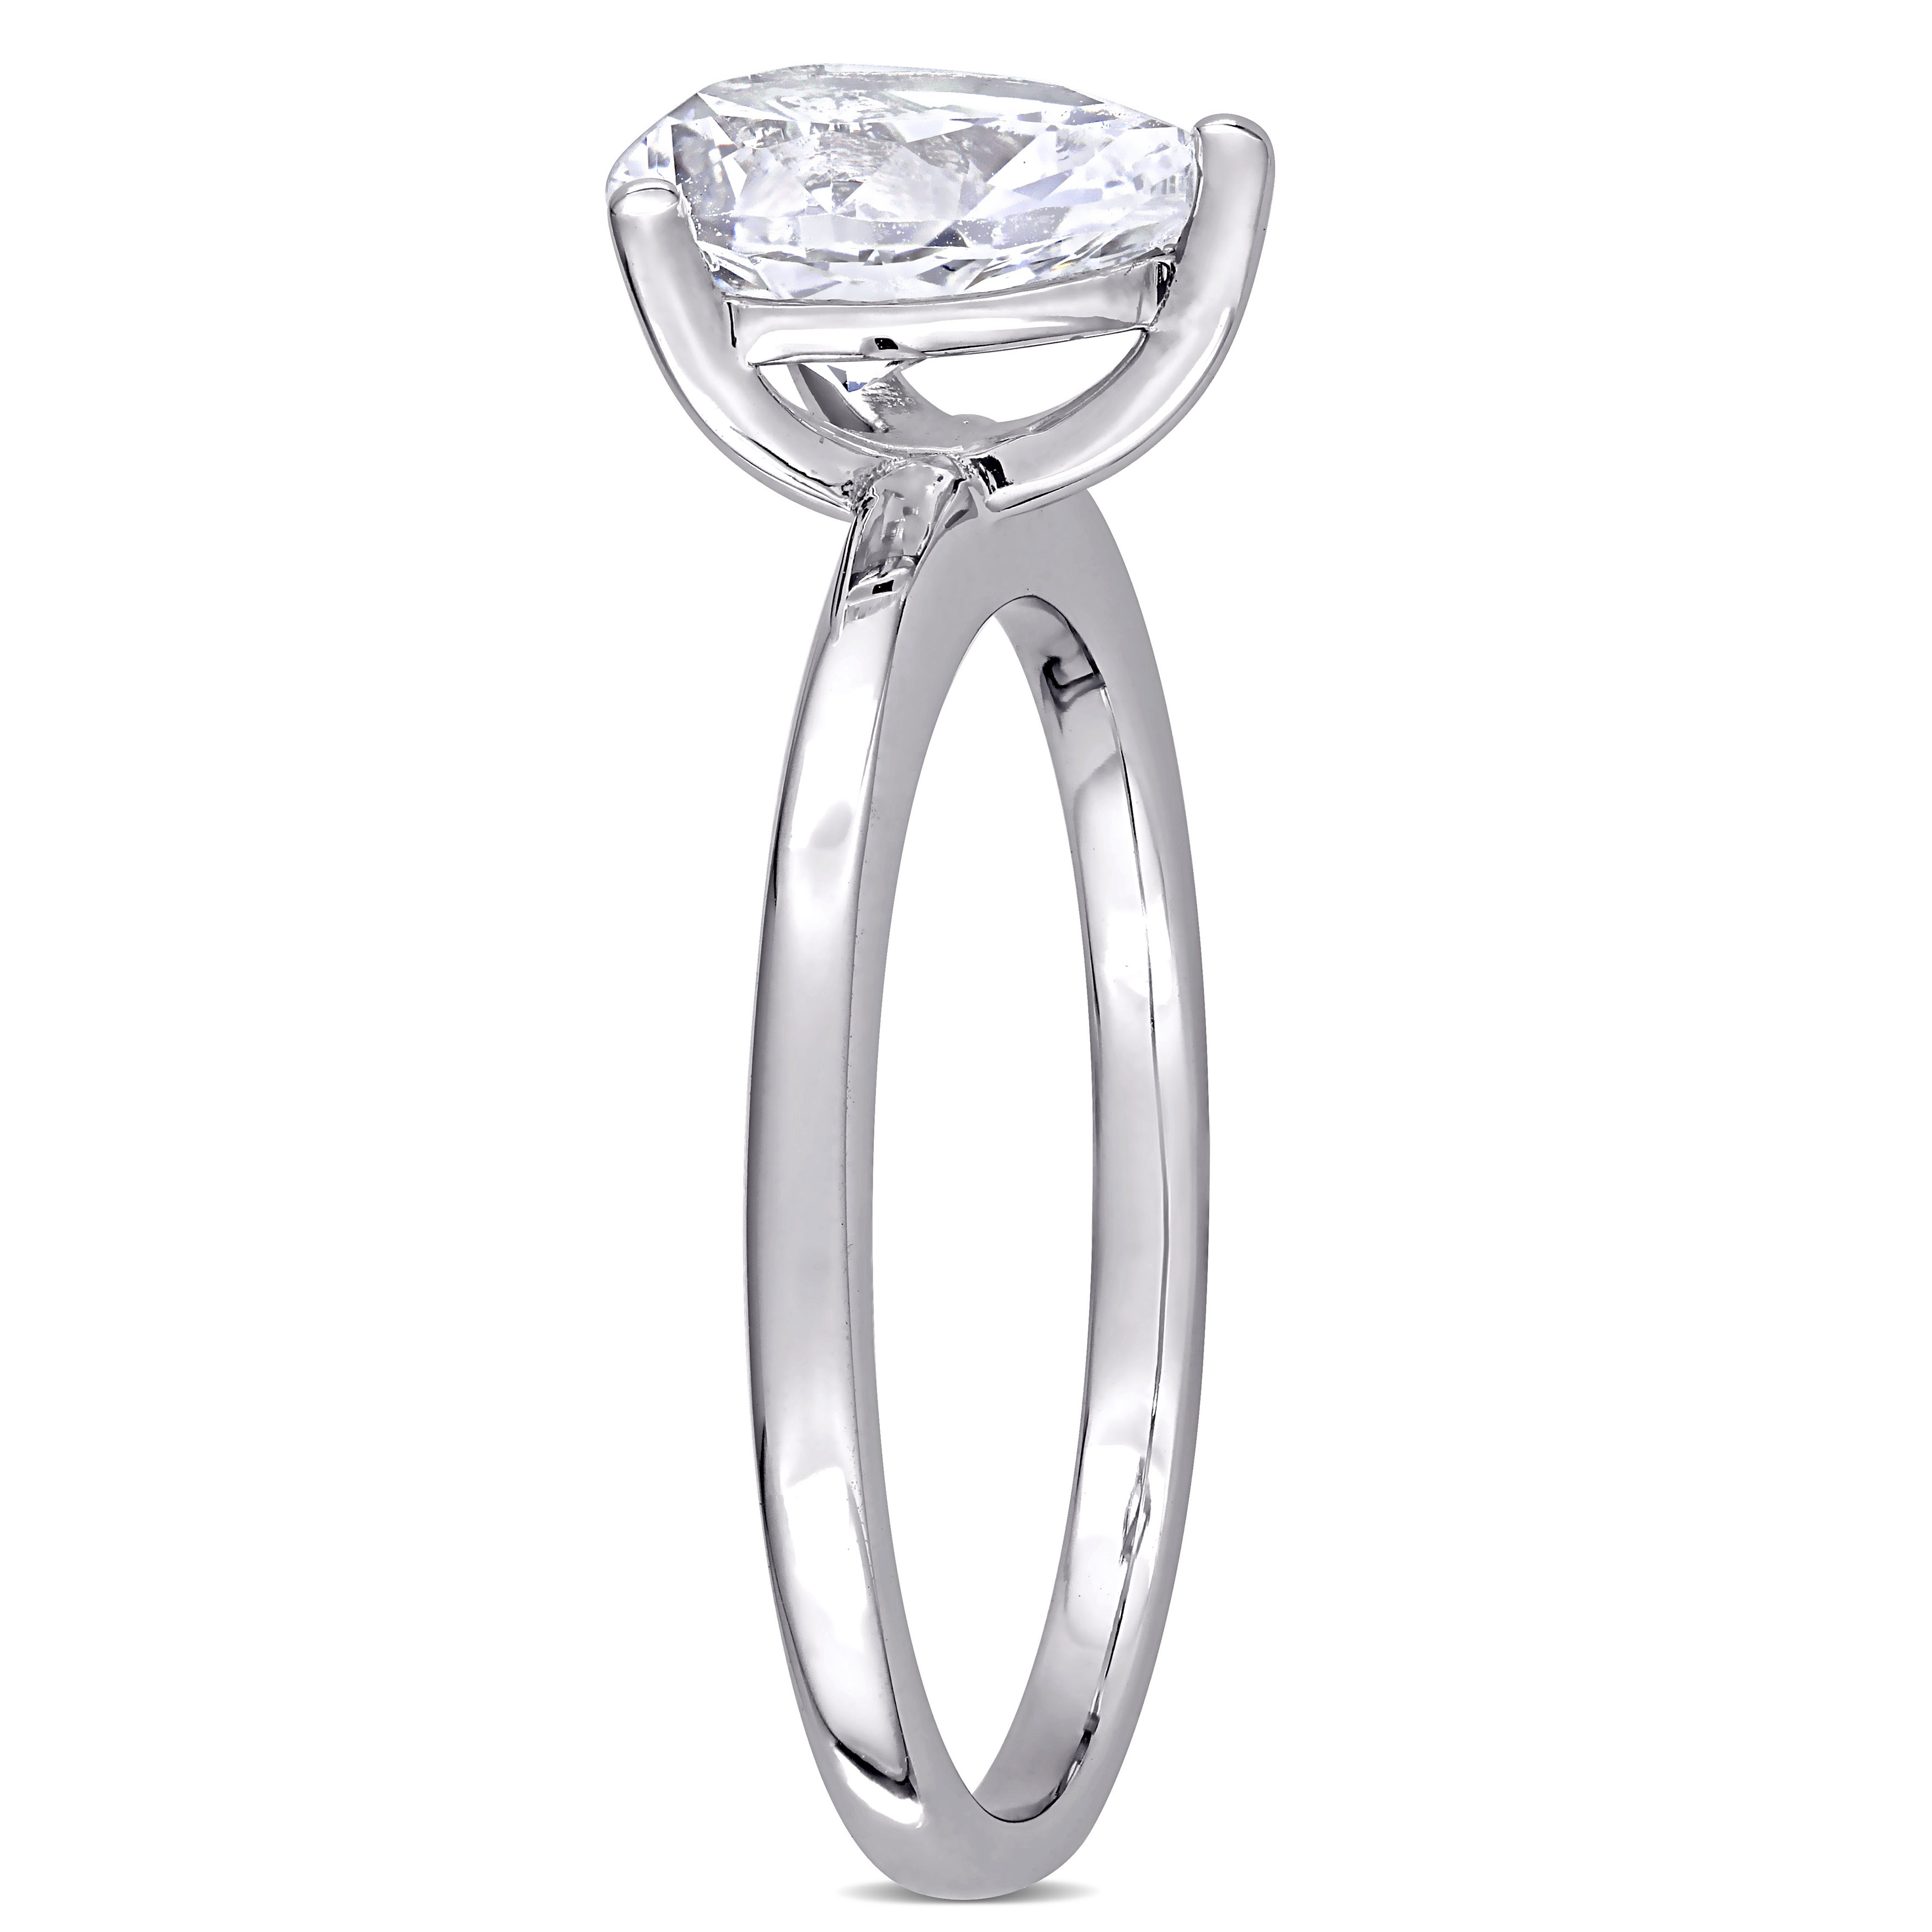 2 5/8 CT TGW Pear Shape Created White Sapphire Solitaire Ring in 10k White Gold